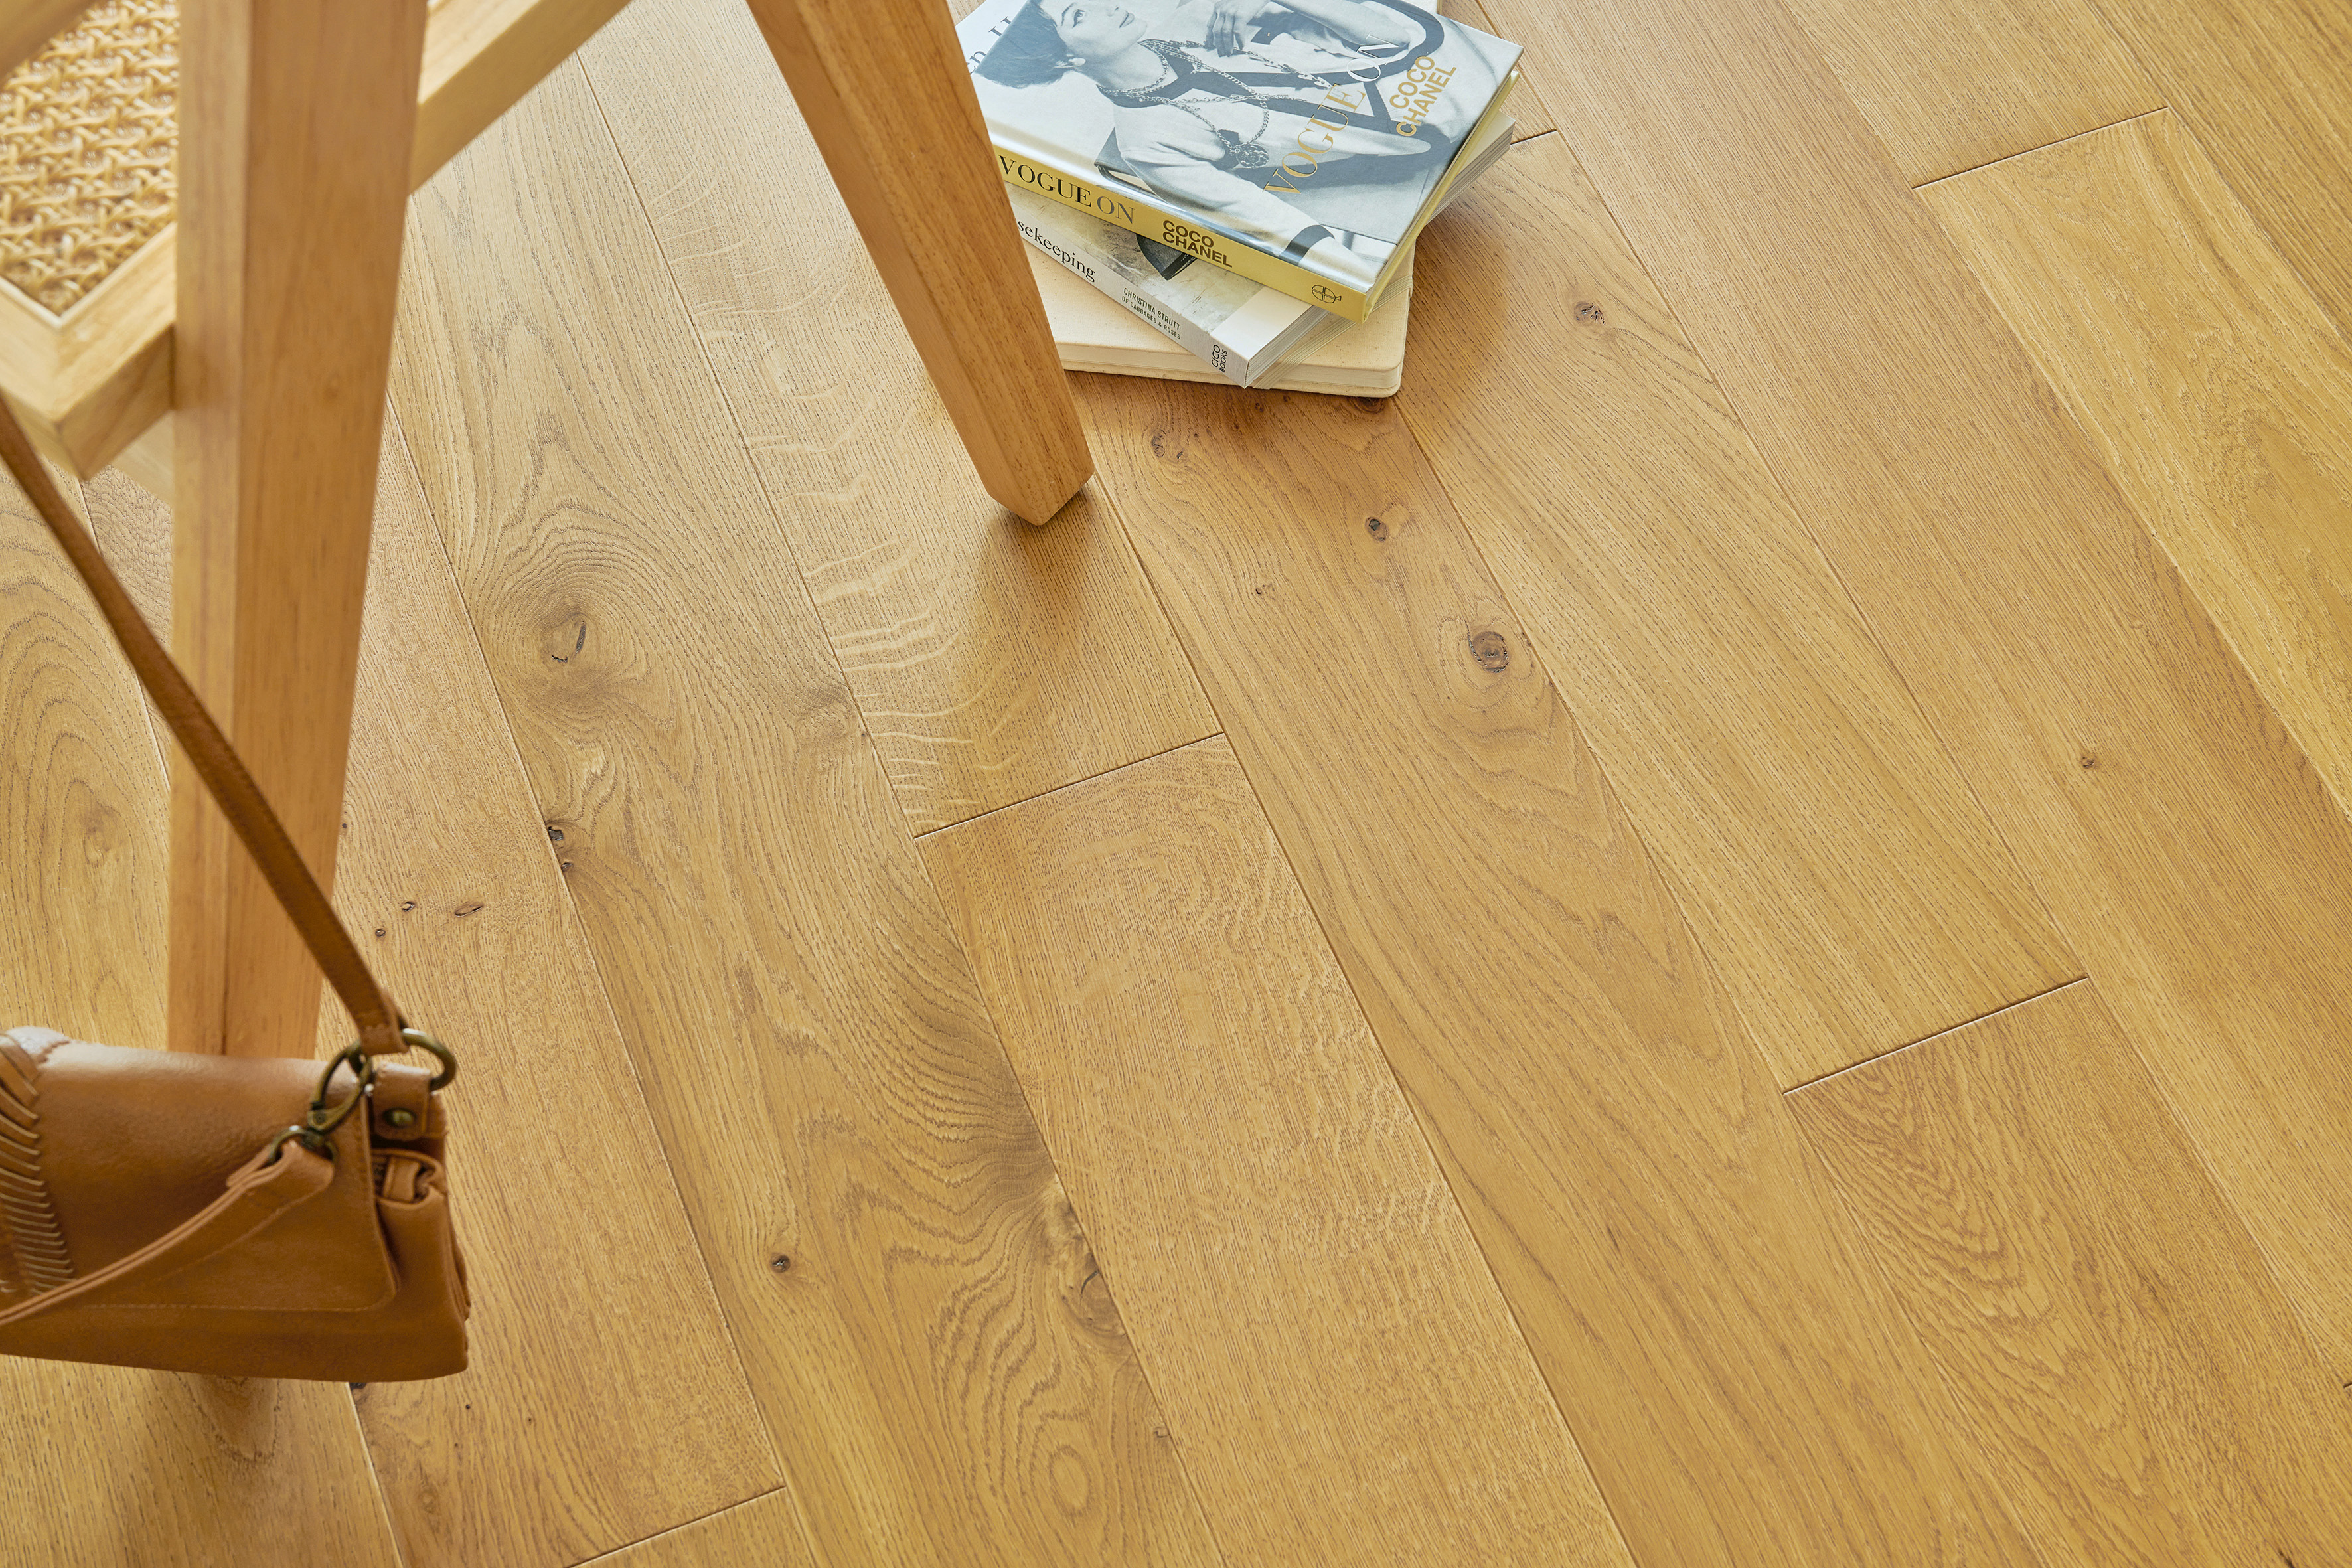 French Oak Authentic Miel Diva 139, Which Is Better Hardwood Or Engineered Flooring